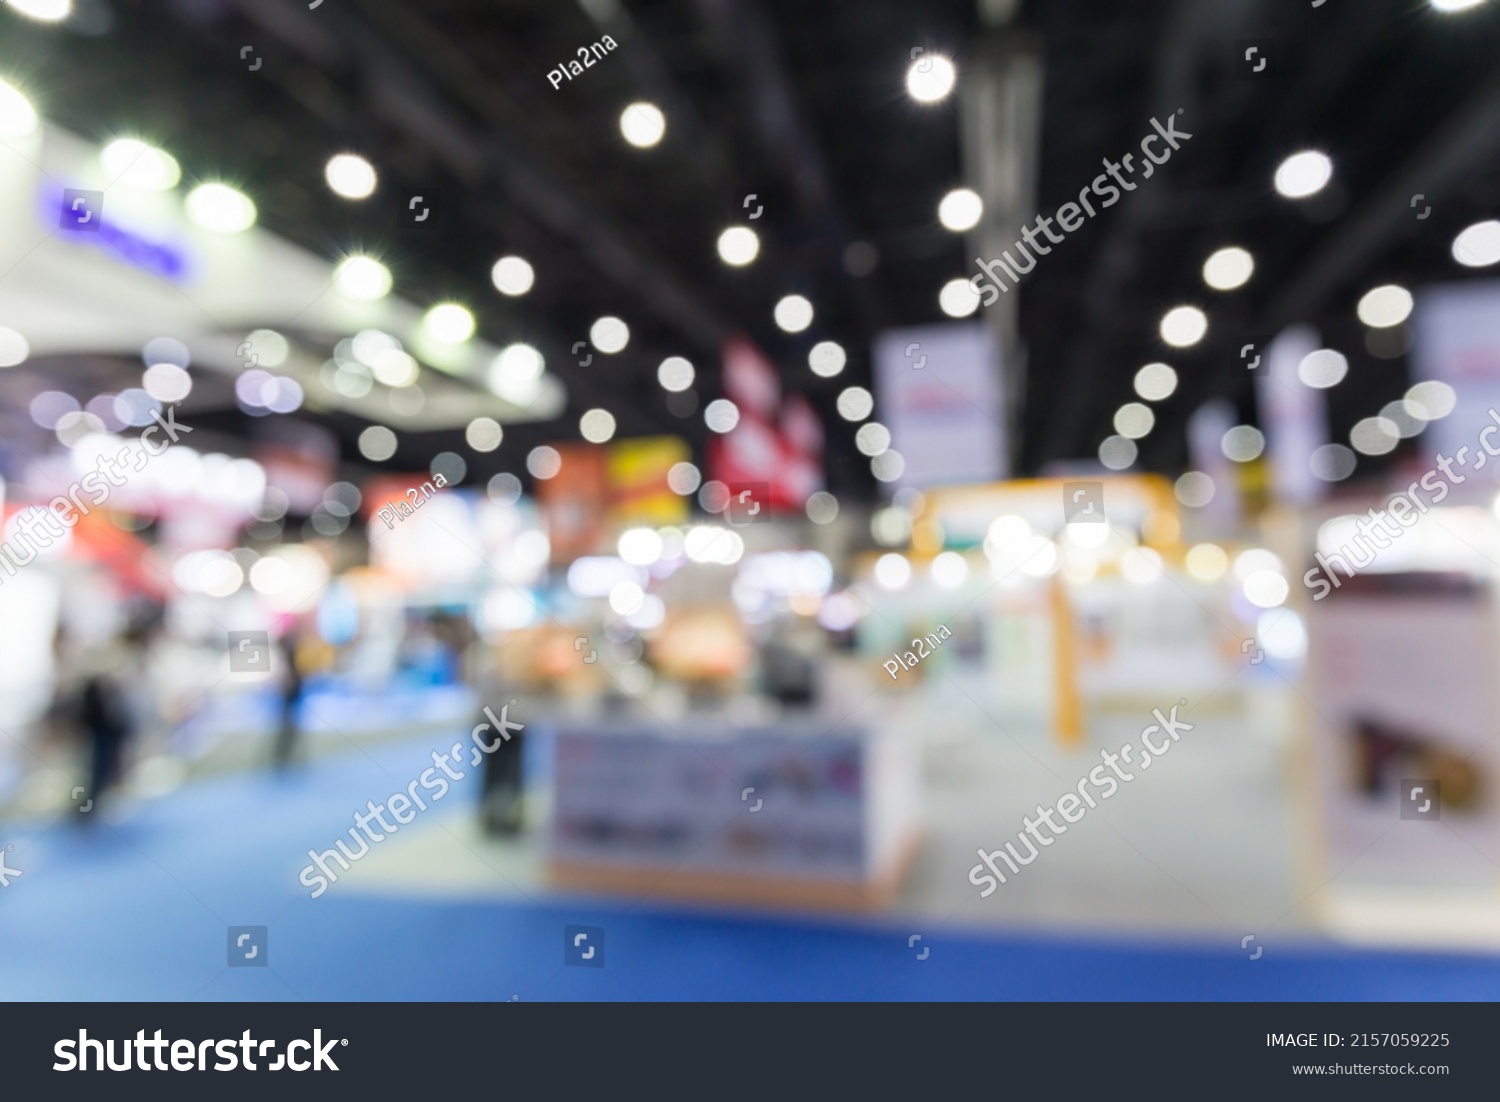 Abstract blur people in exhibition hall event trade show expo background. Large international exhibition, convention center, Business marketing and MICE industry concept. #2157059225